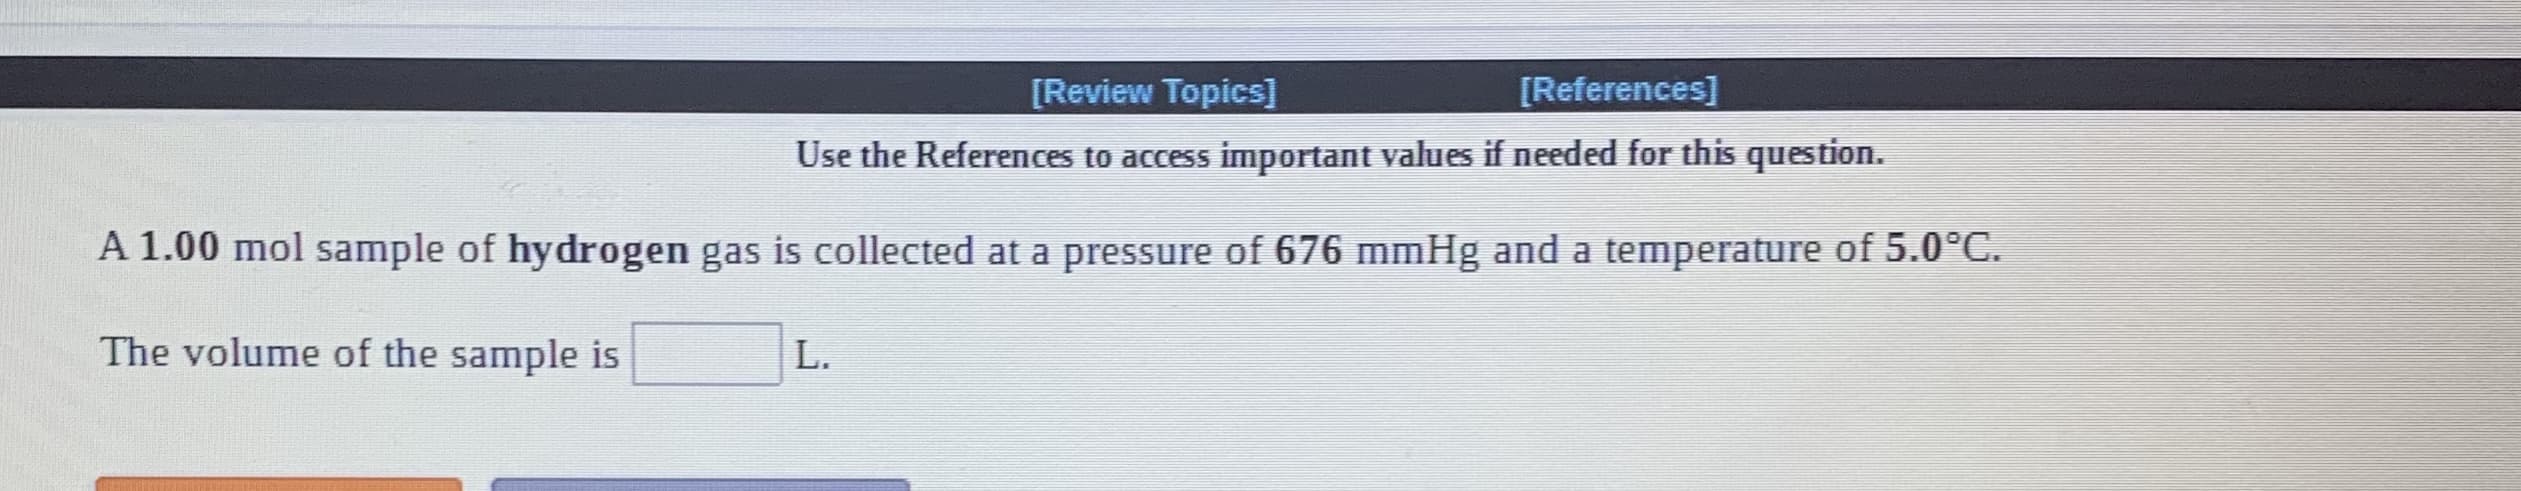 [Review Topics]
[References]
Use the References to access important values if needed for this question.
A 1.00 mol sample of hydrogen gas is collected at a pressure of 676 mmHg and a temperature of 5.0°C.
The volume of the sample is
L.
